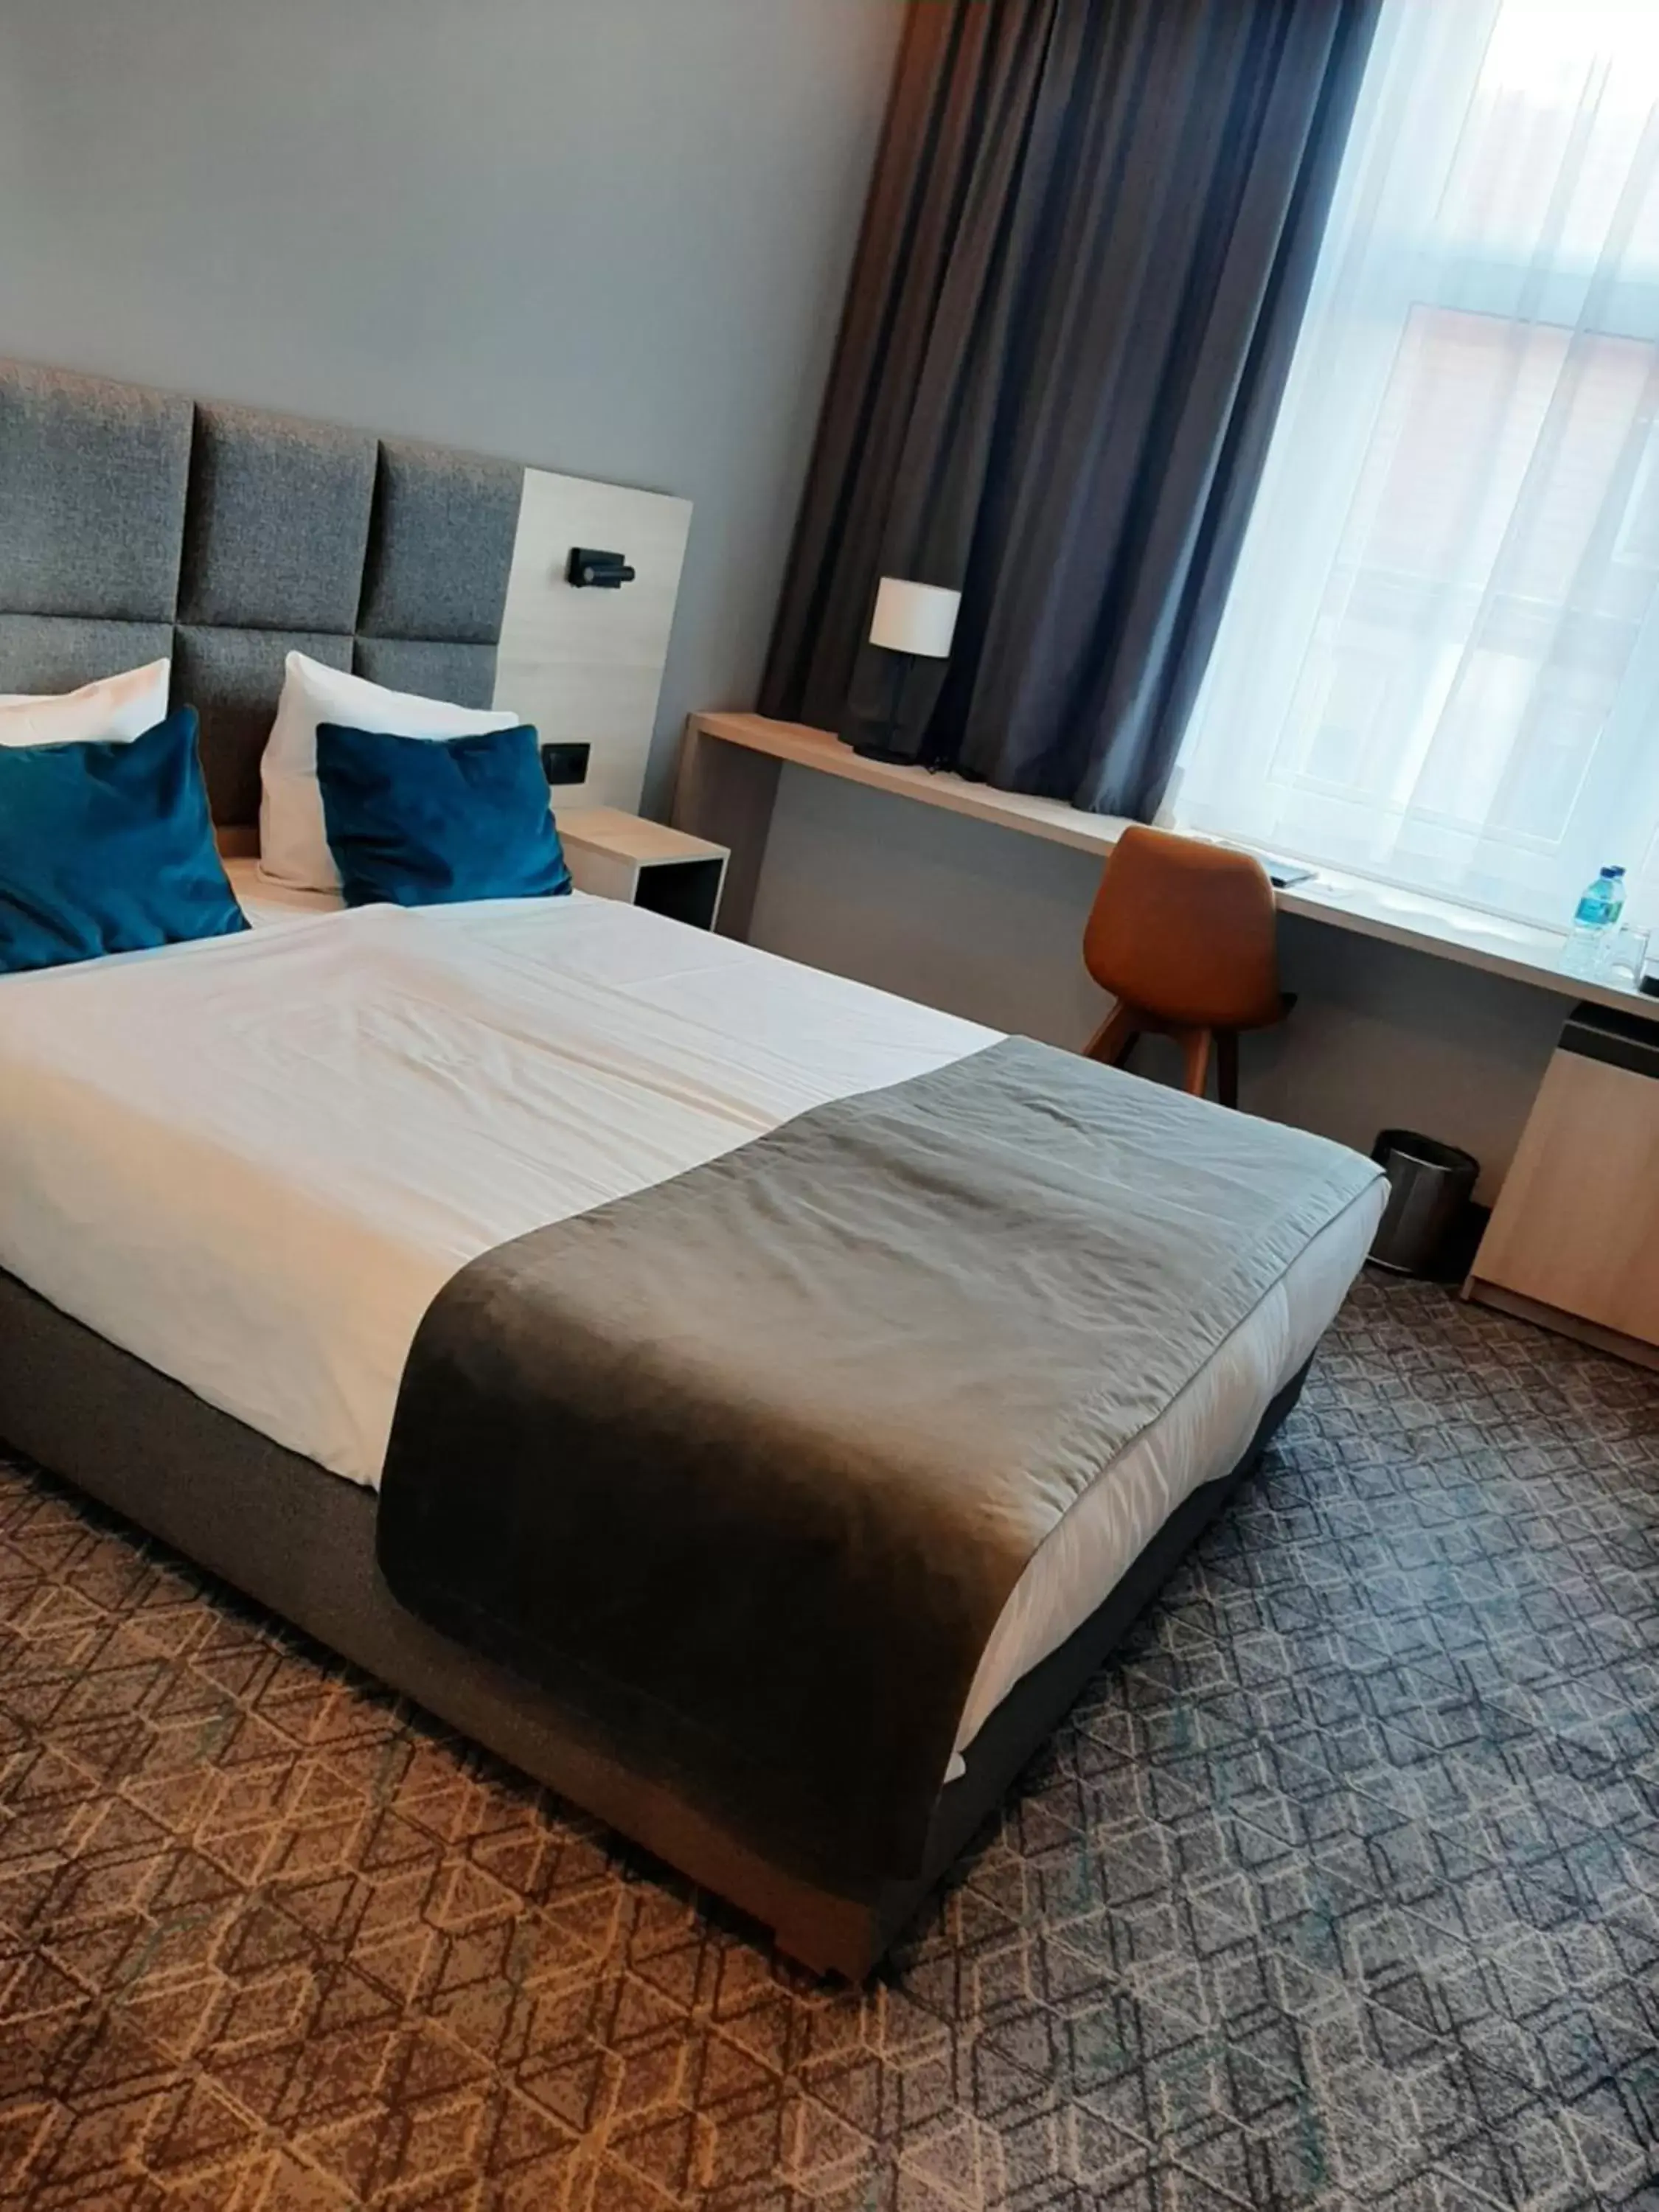 Bed in Korona Hotel Wroclaw Market Square